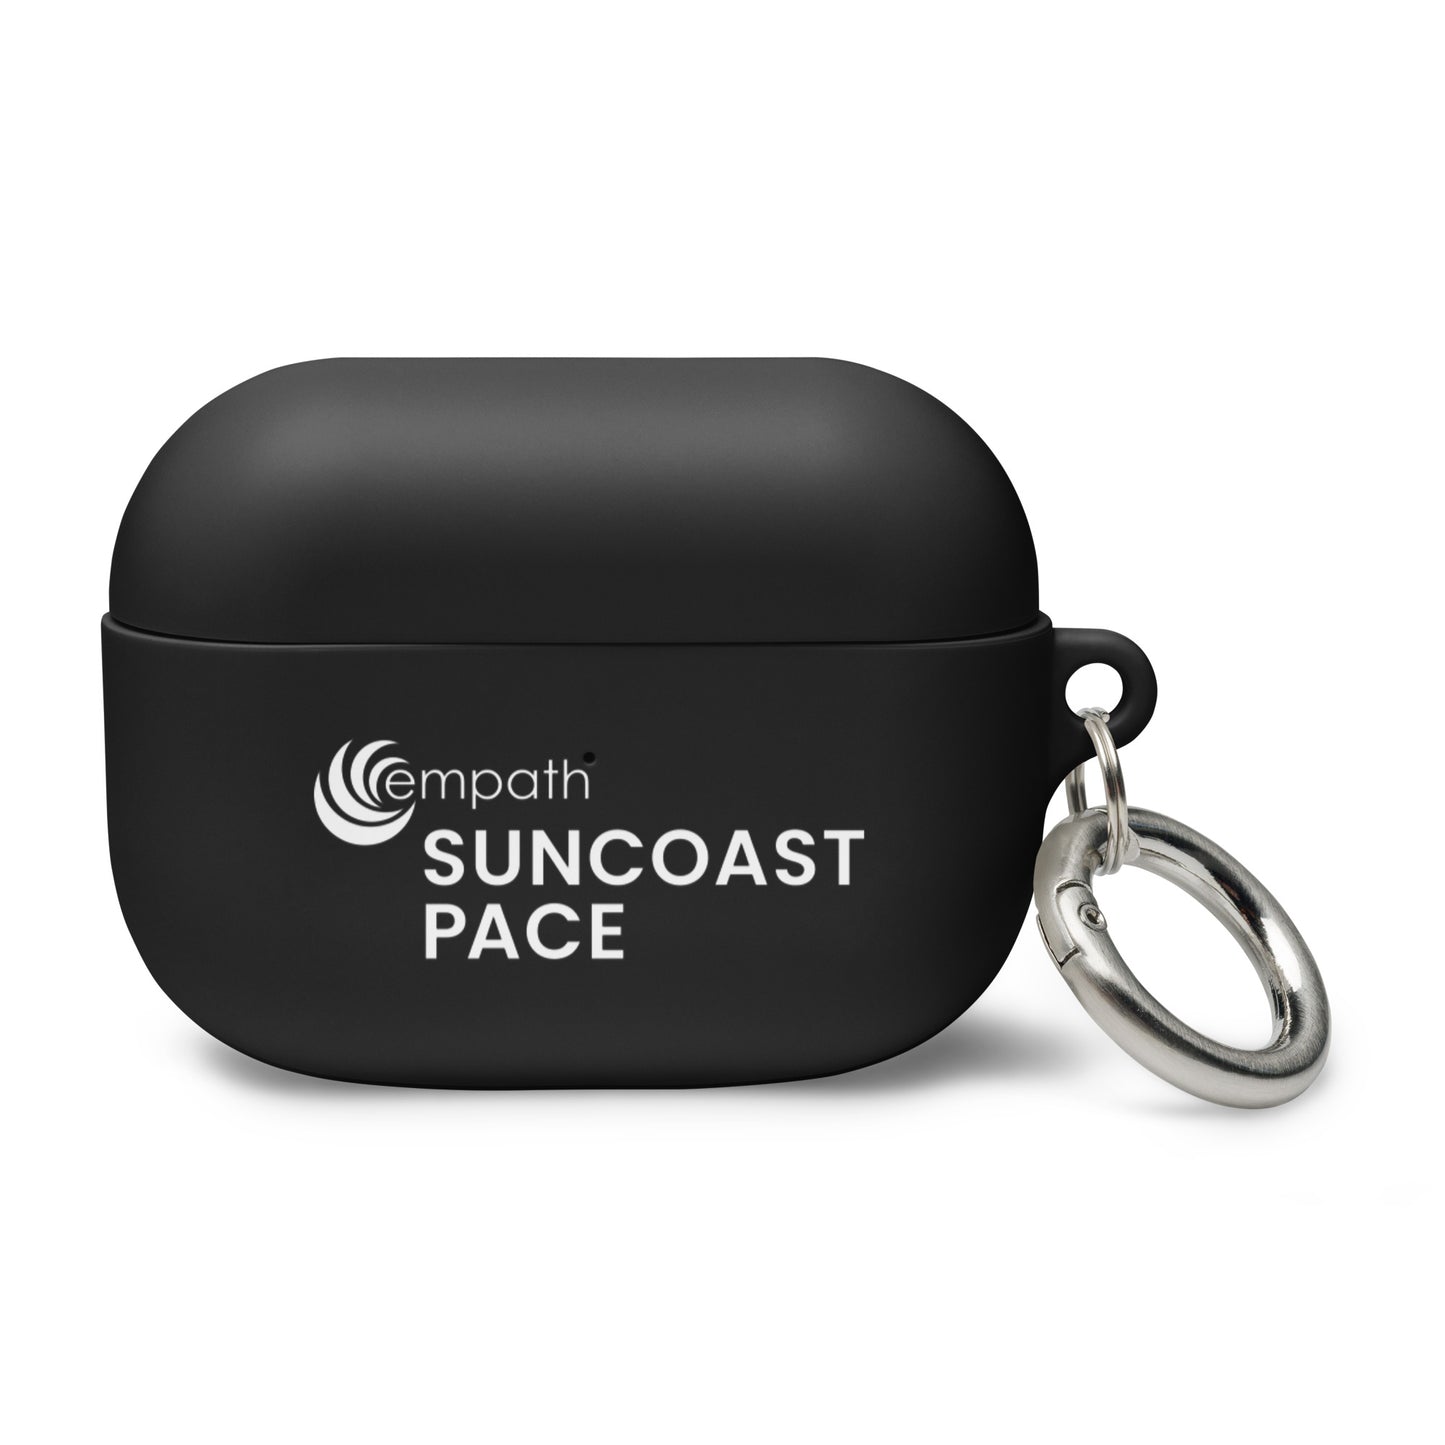 Rubber Case for AirPods® - Suncoast PACE